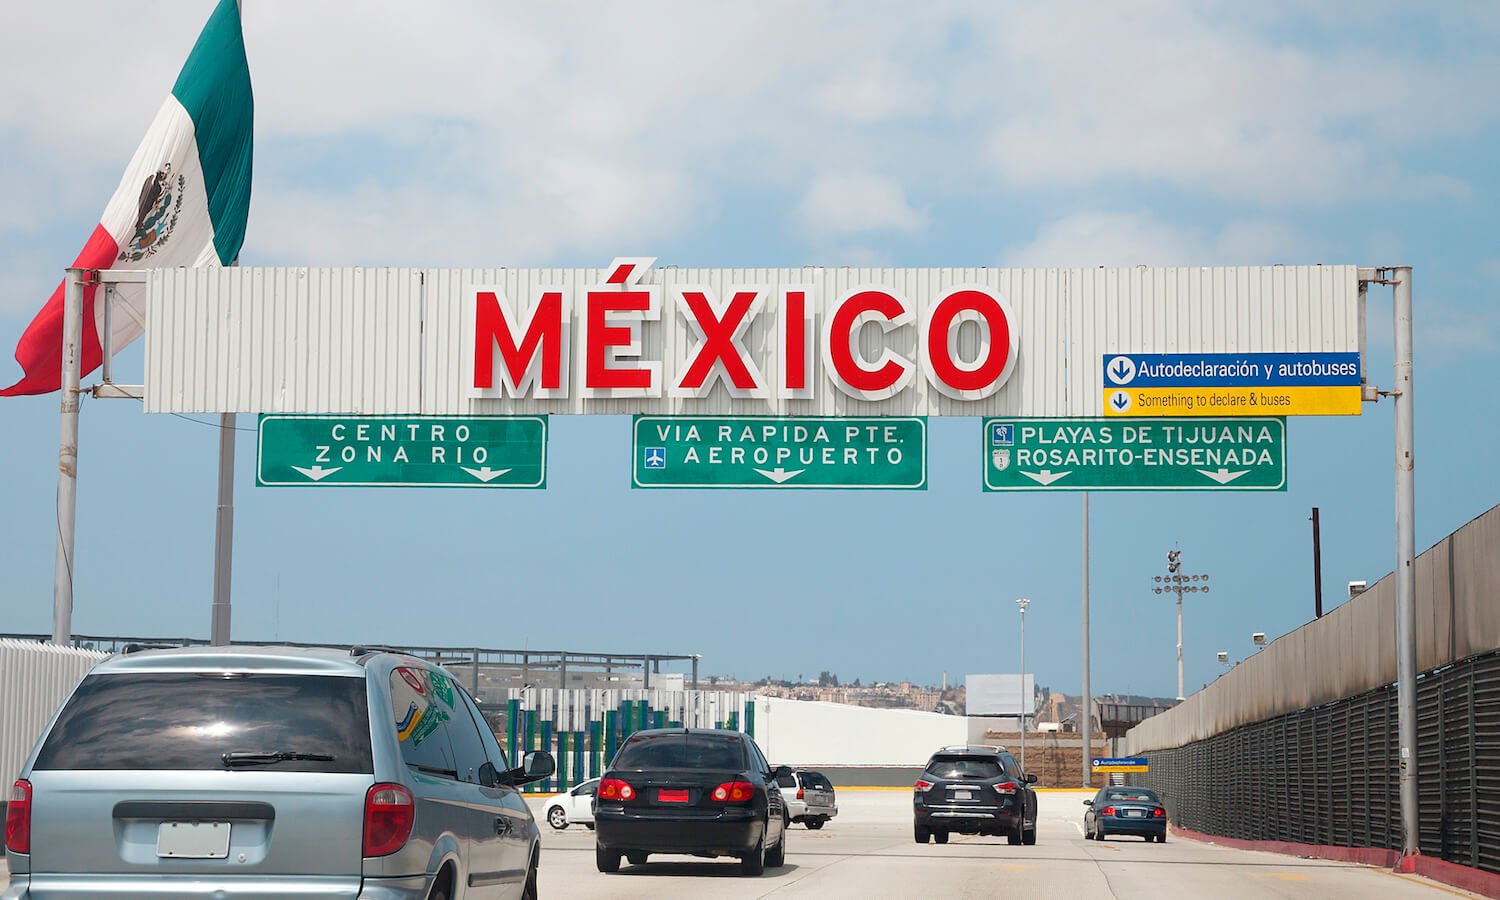 A view of the highway entrance to Tijuana Baja California at the international US Border with Mexico in San Diego.